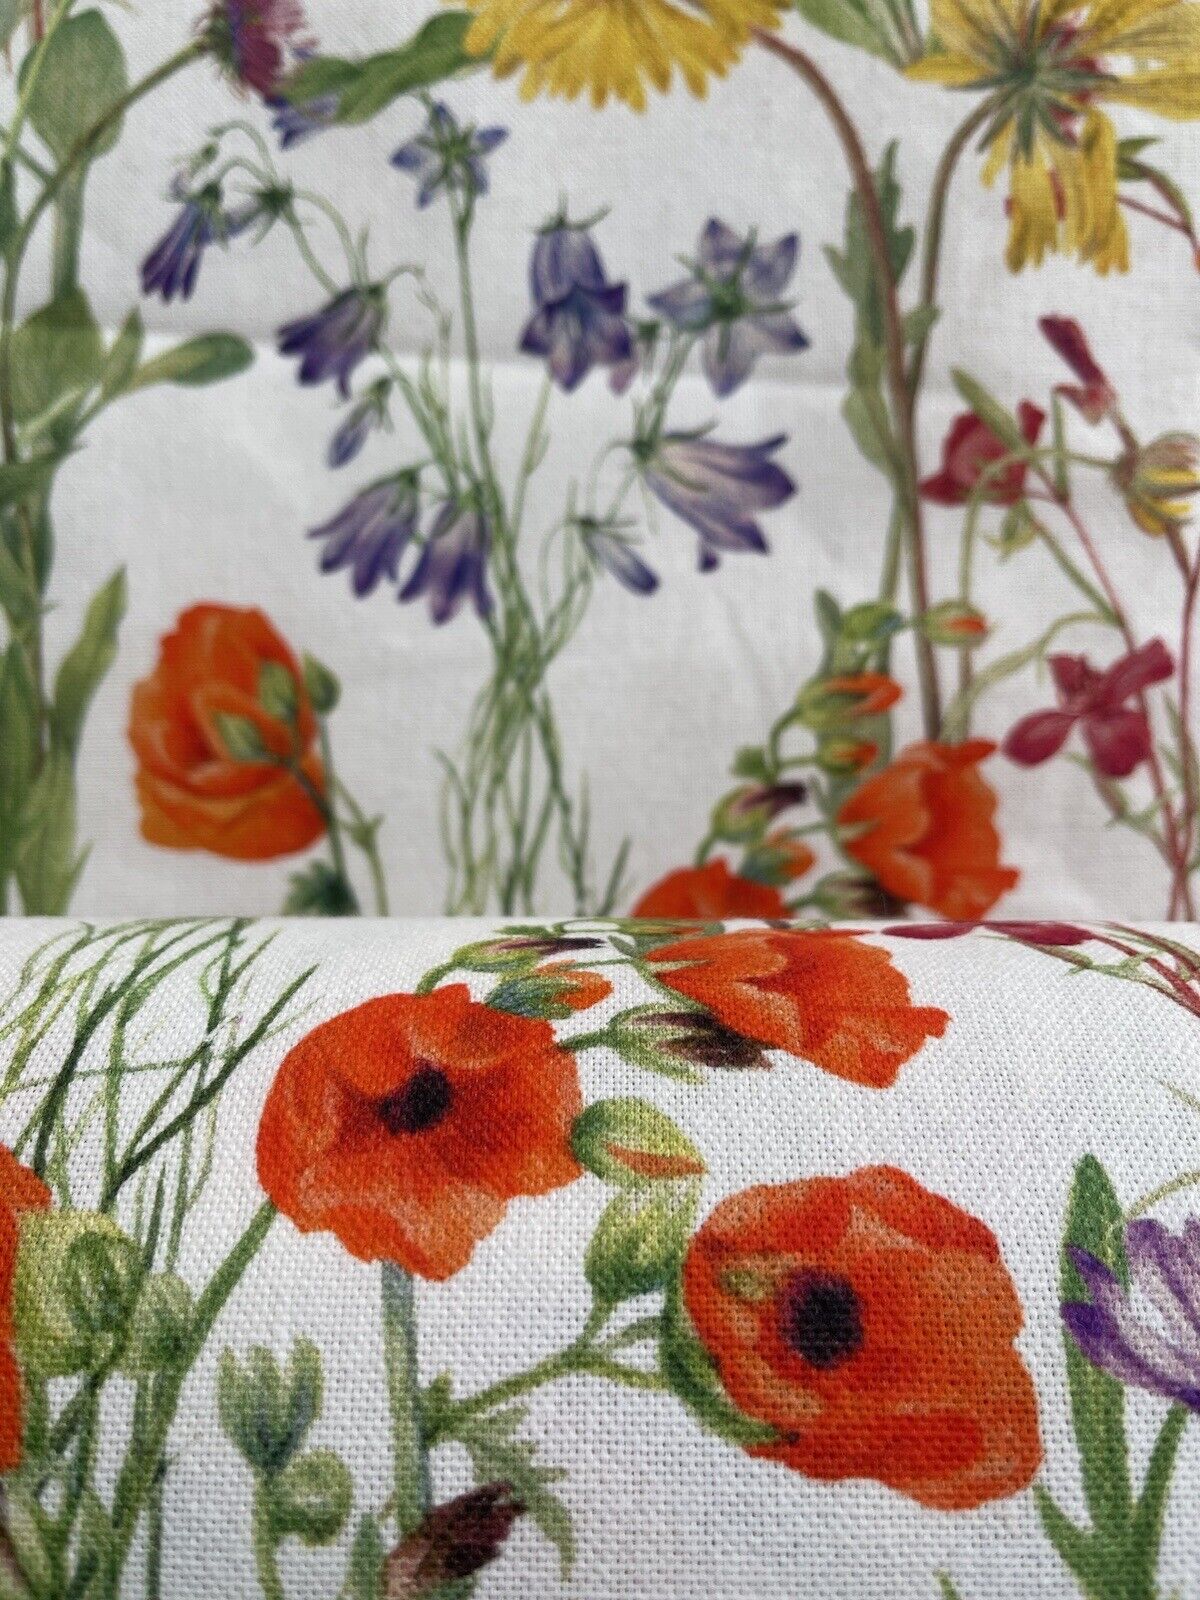 Summer Flowers Fields Cotton Fabric by Meter Botanical Floral Sewing Material By Yards Meters Poppy Print Textile Country Style Canvas For Pillows